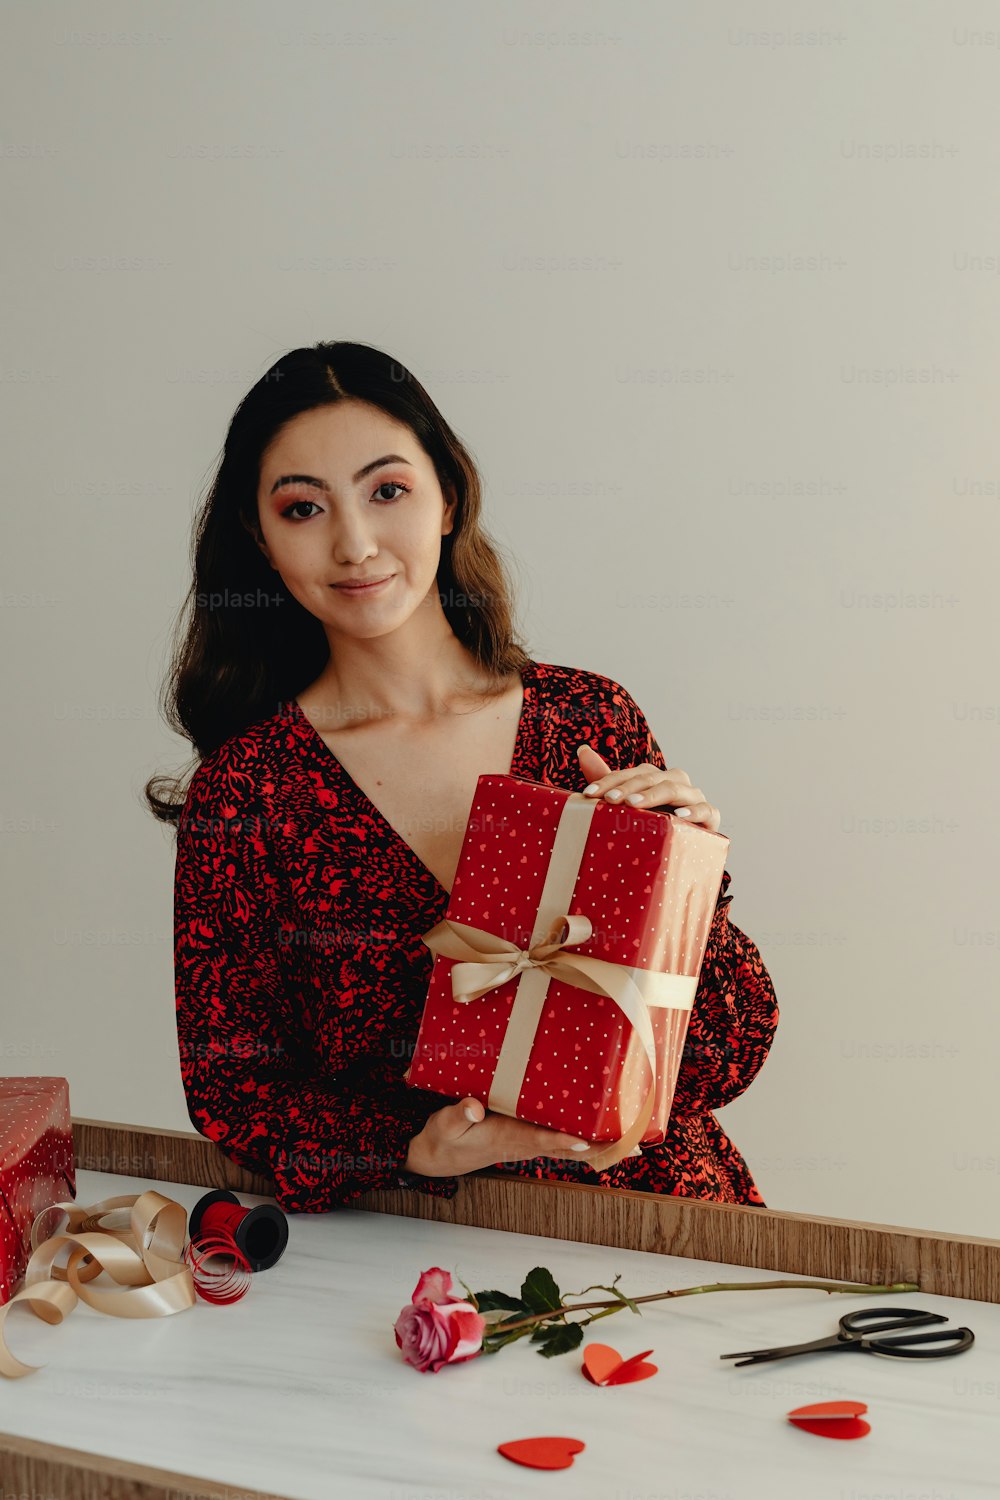 a woman in a red dress holding a gift